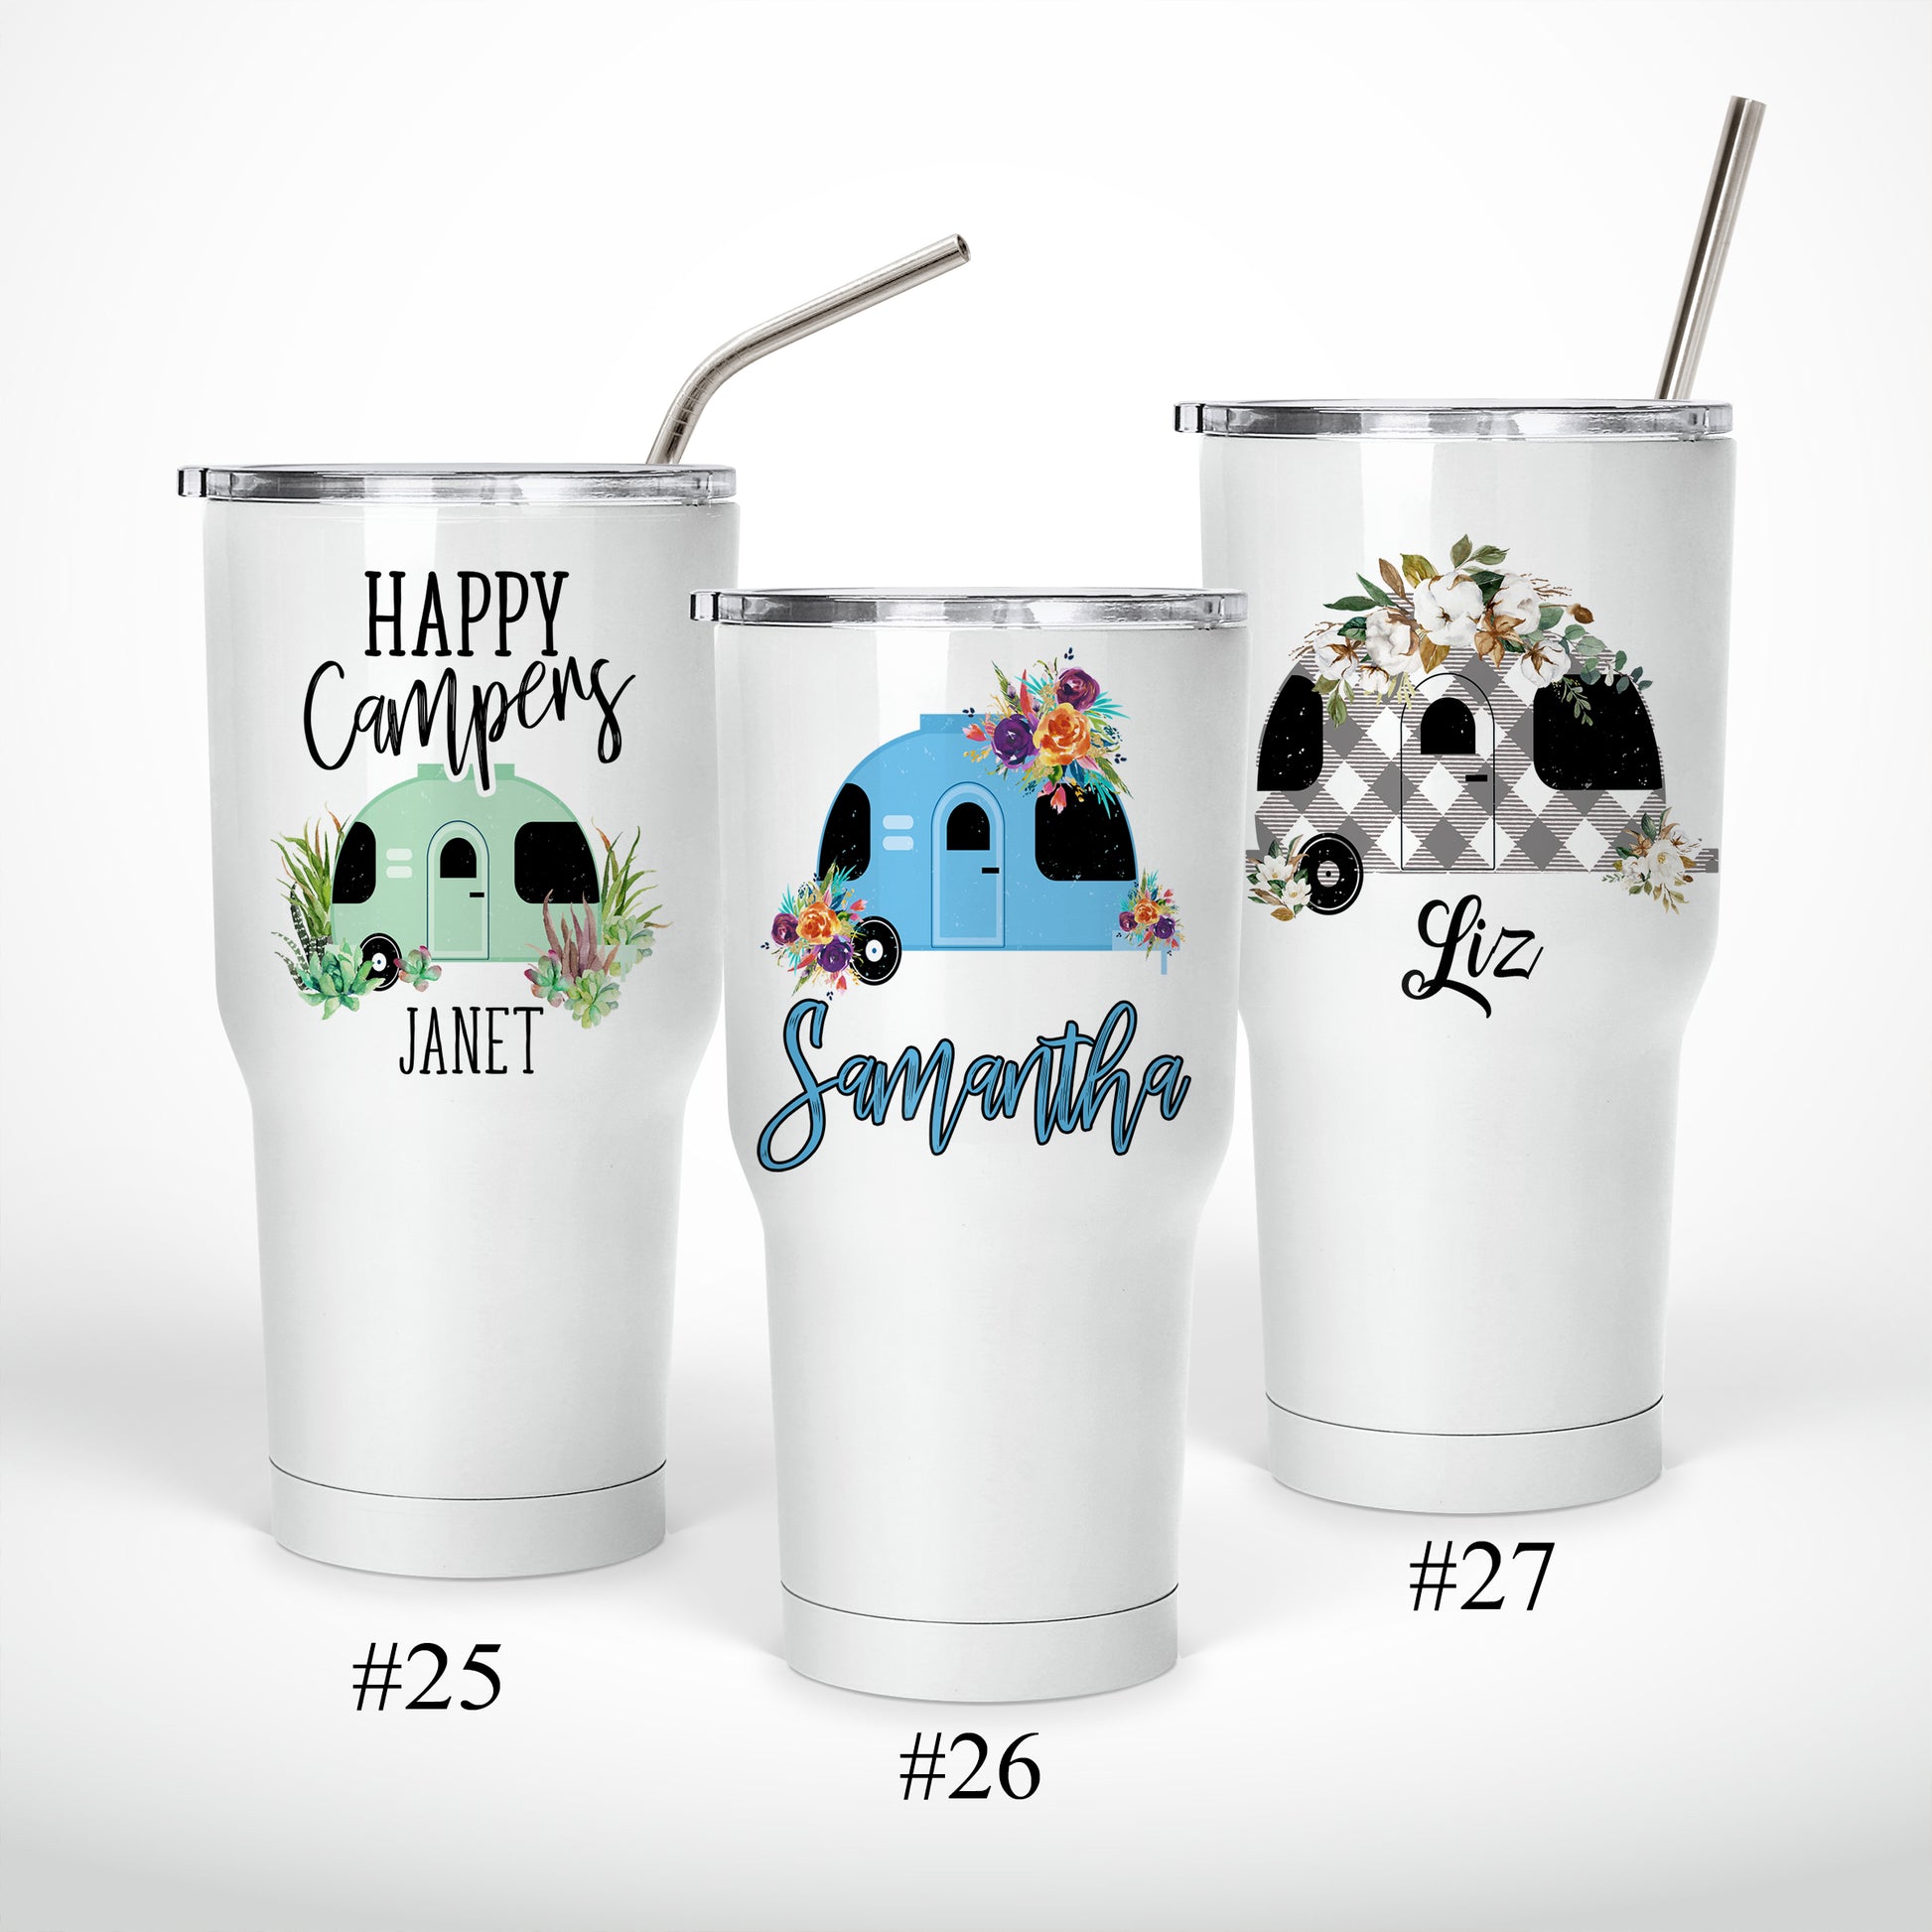 Happy Camper - Engraved Stainless Steel Tumbler, Yeti Style Cup, Happy  Camper Cup